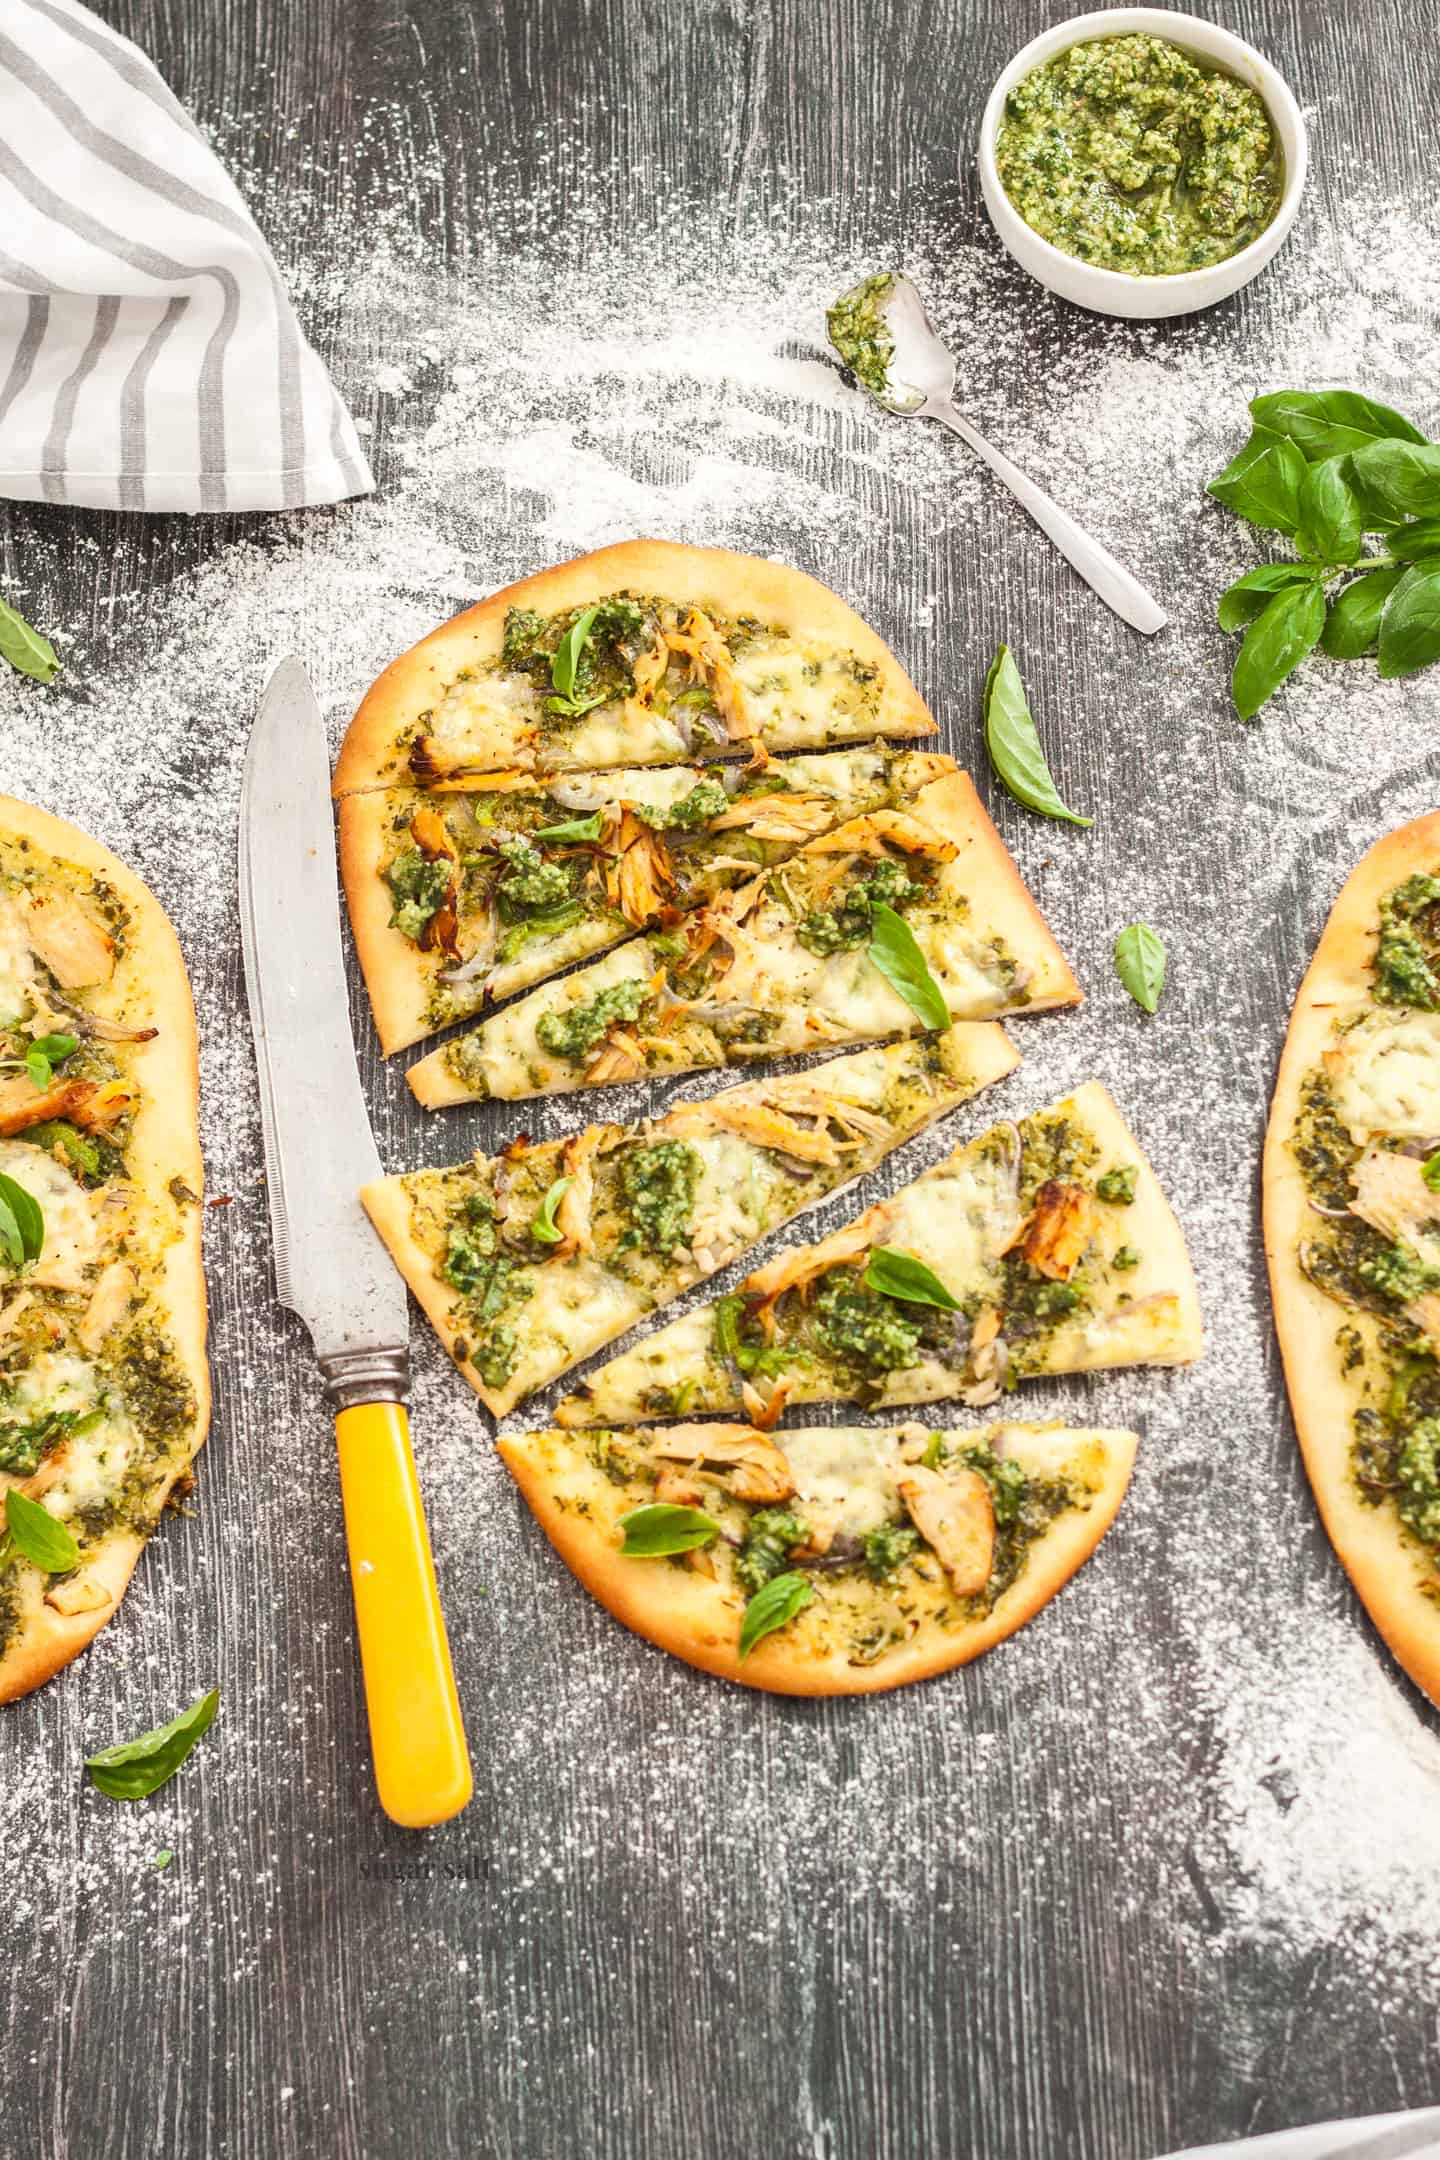 3 flatbreads topped with pesto and turkey, cut into slices, on a wood surface.